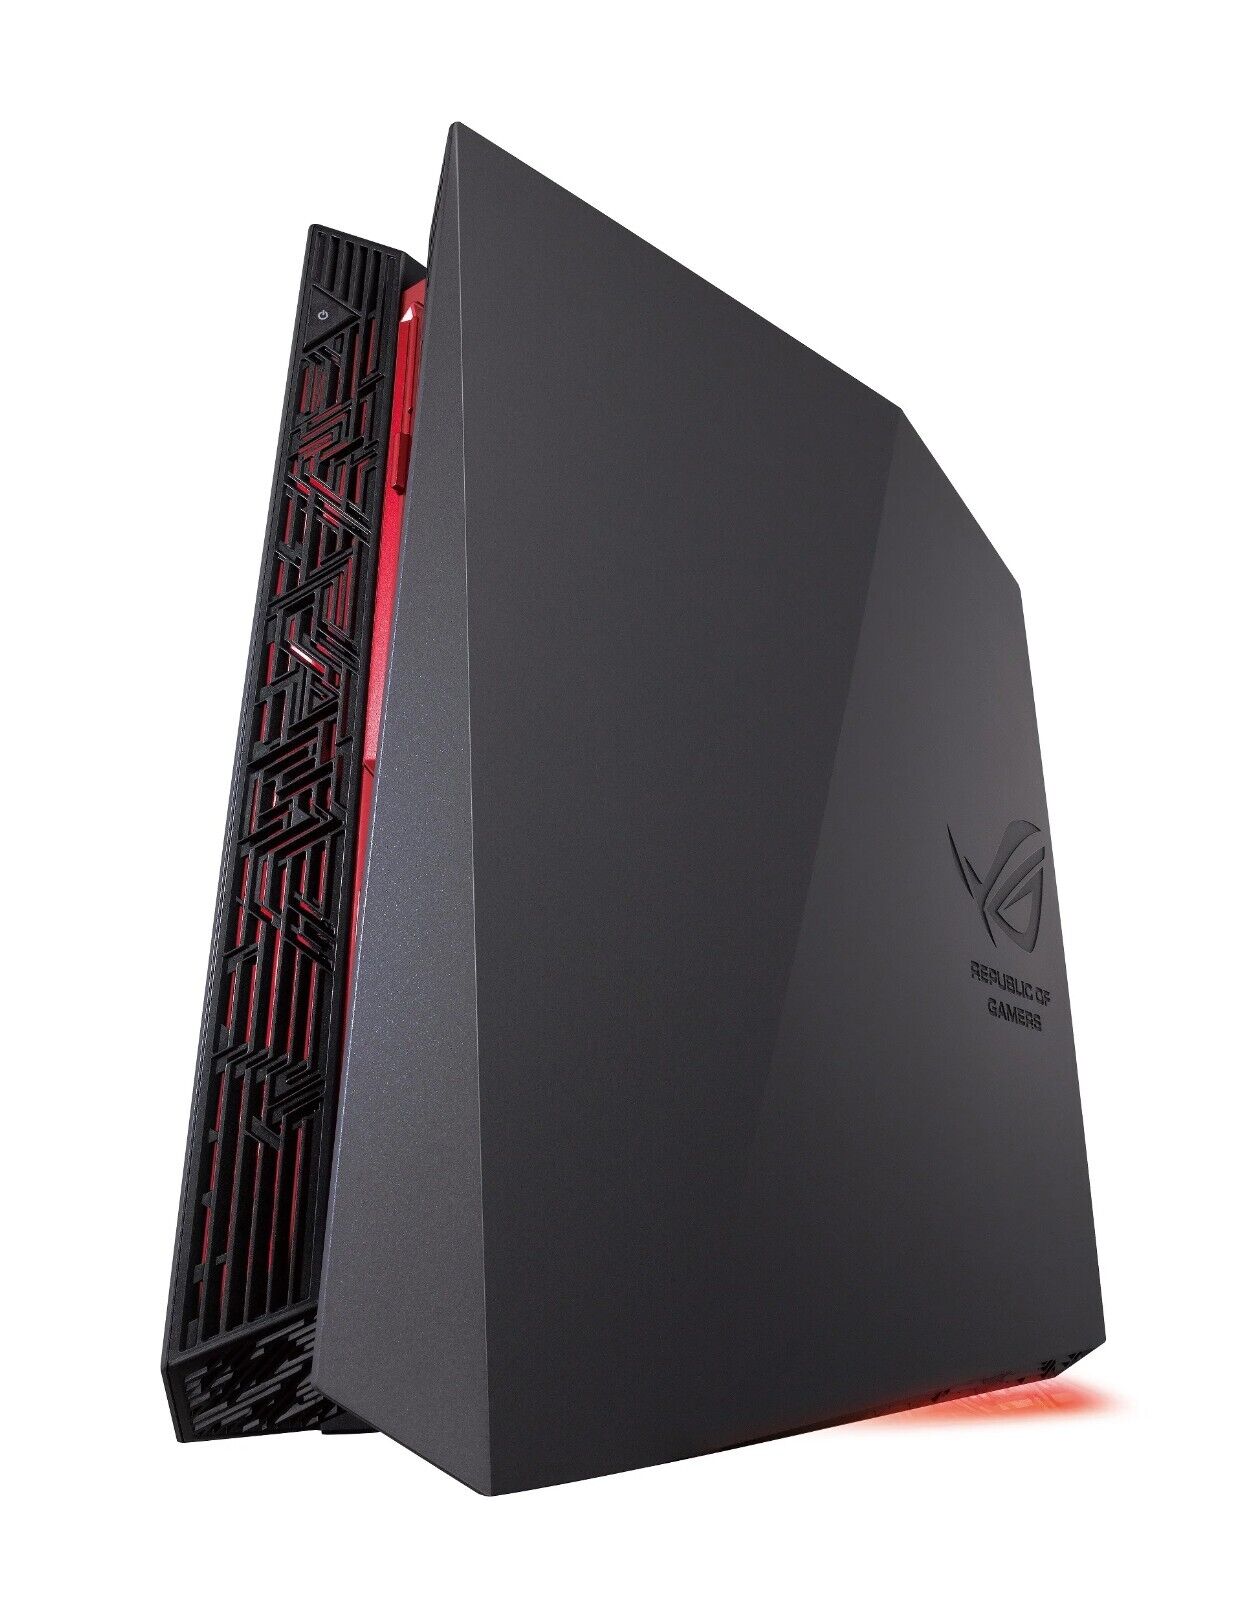 Asus ROG G20AJ with Nvidia GeForce GTX 1050 Graphics Card and 16gbs of Ram.